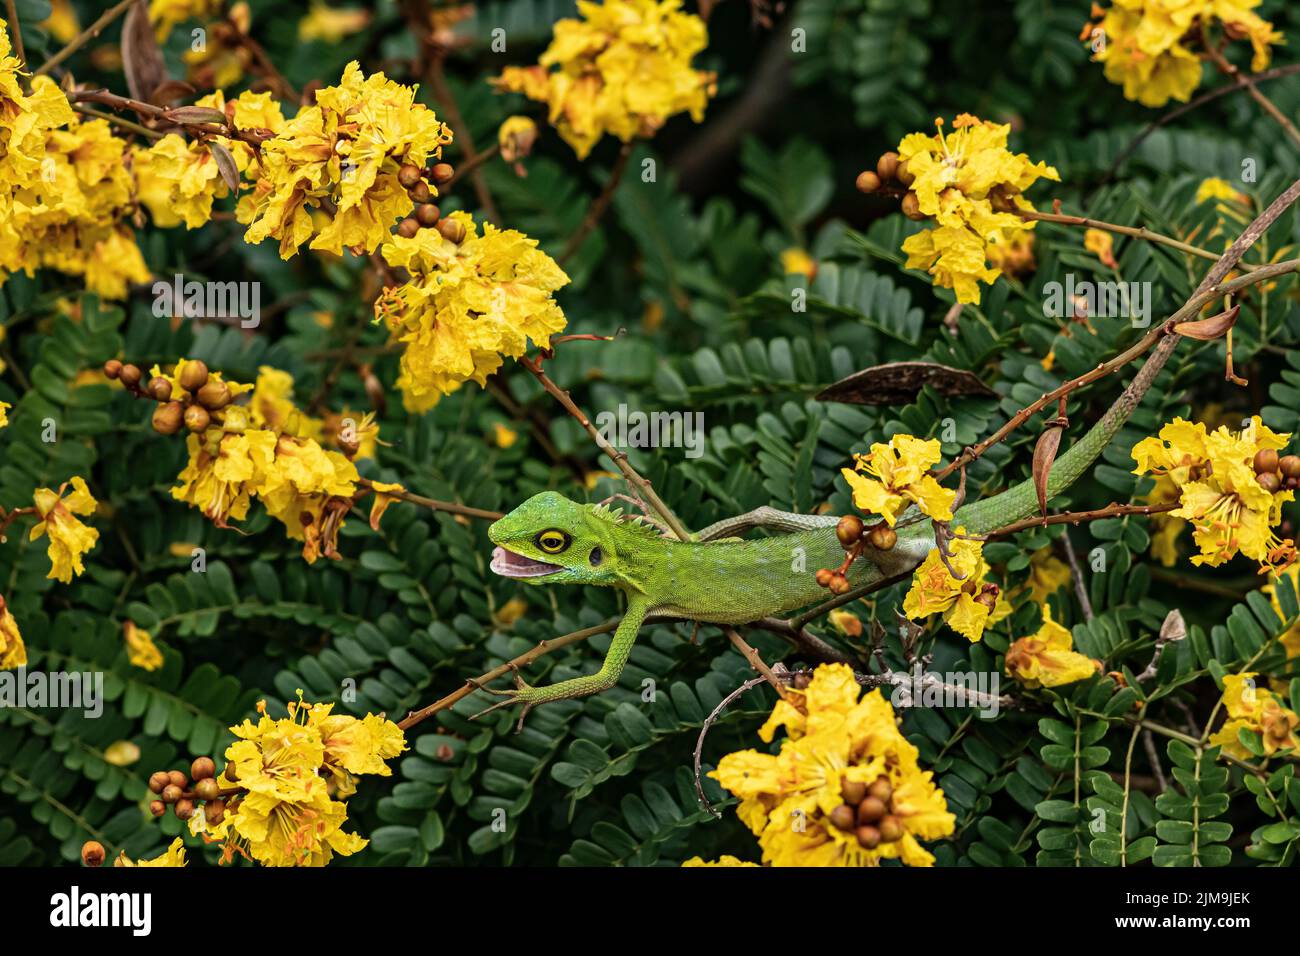 Green crested lizard amongst the yellow flame flower in Malaysia. Stock Photo